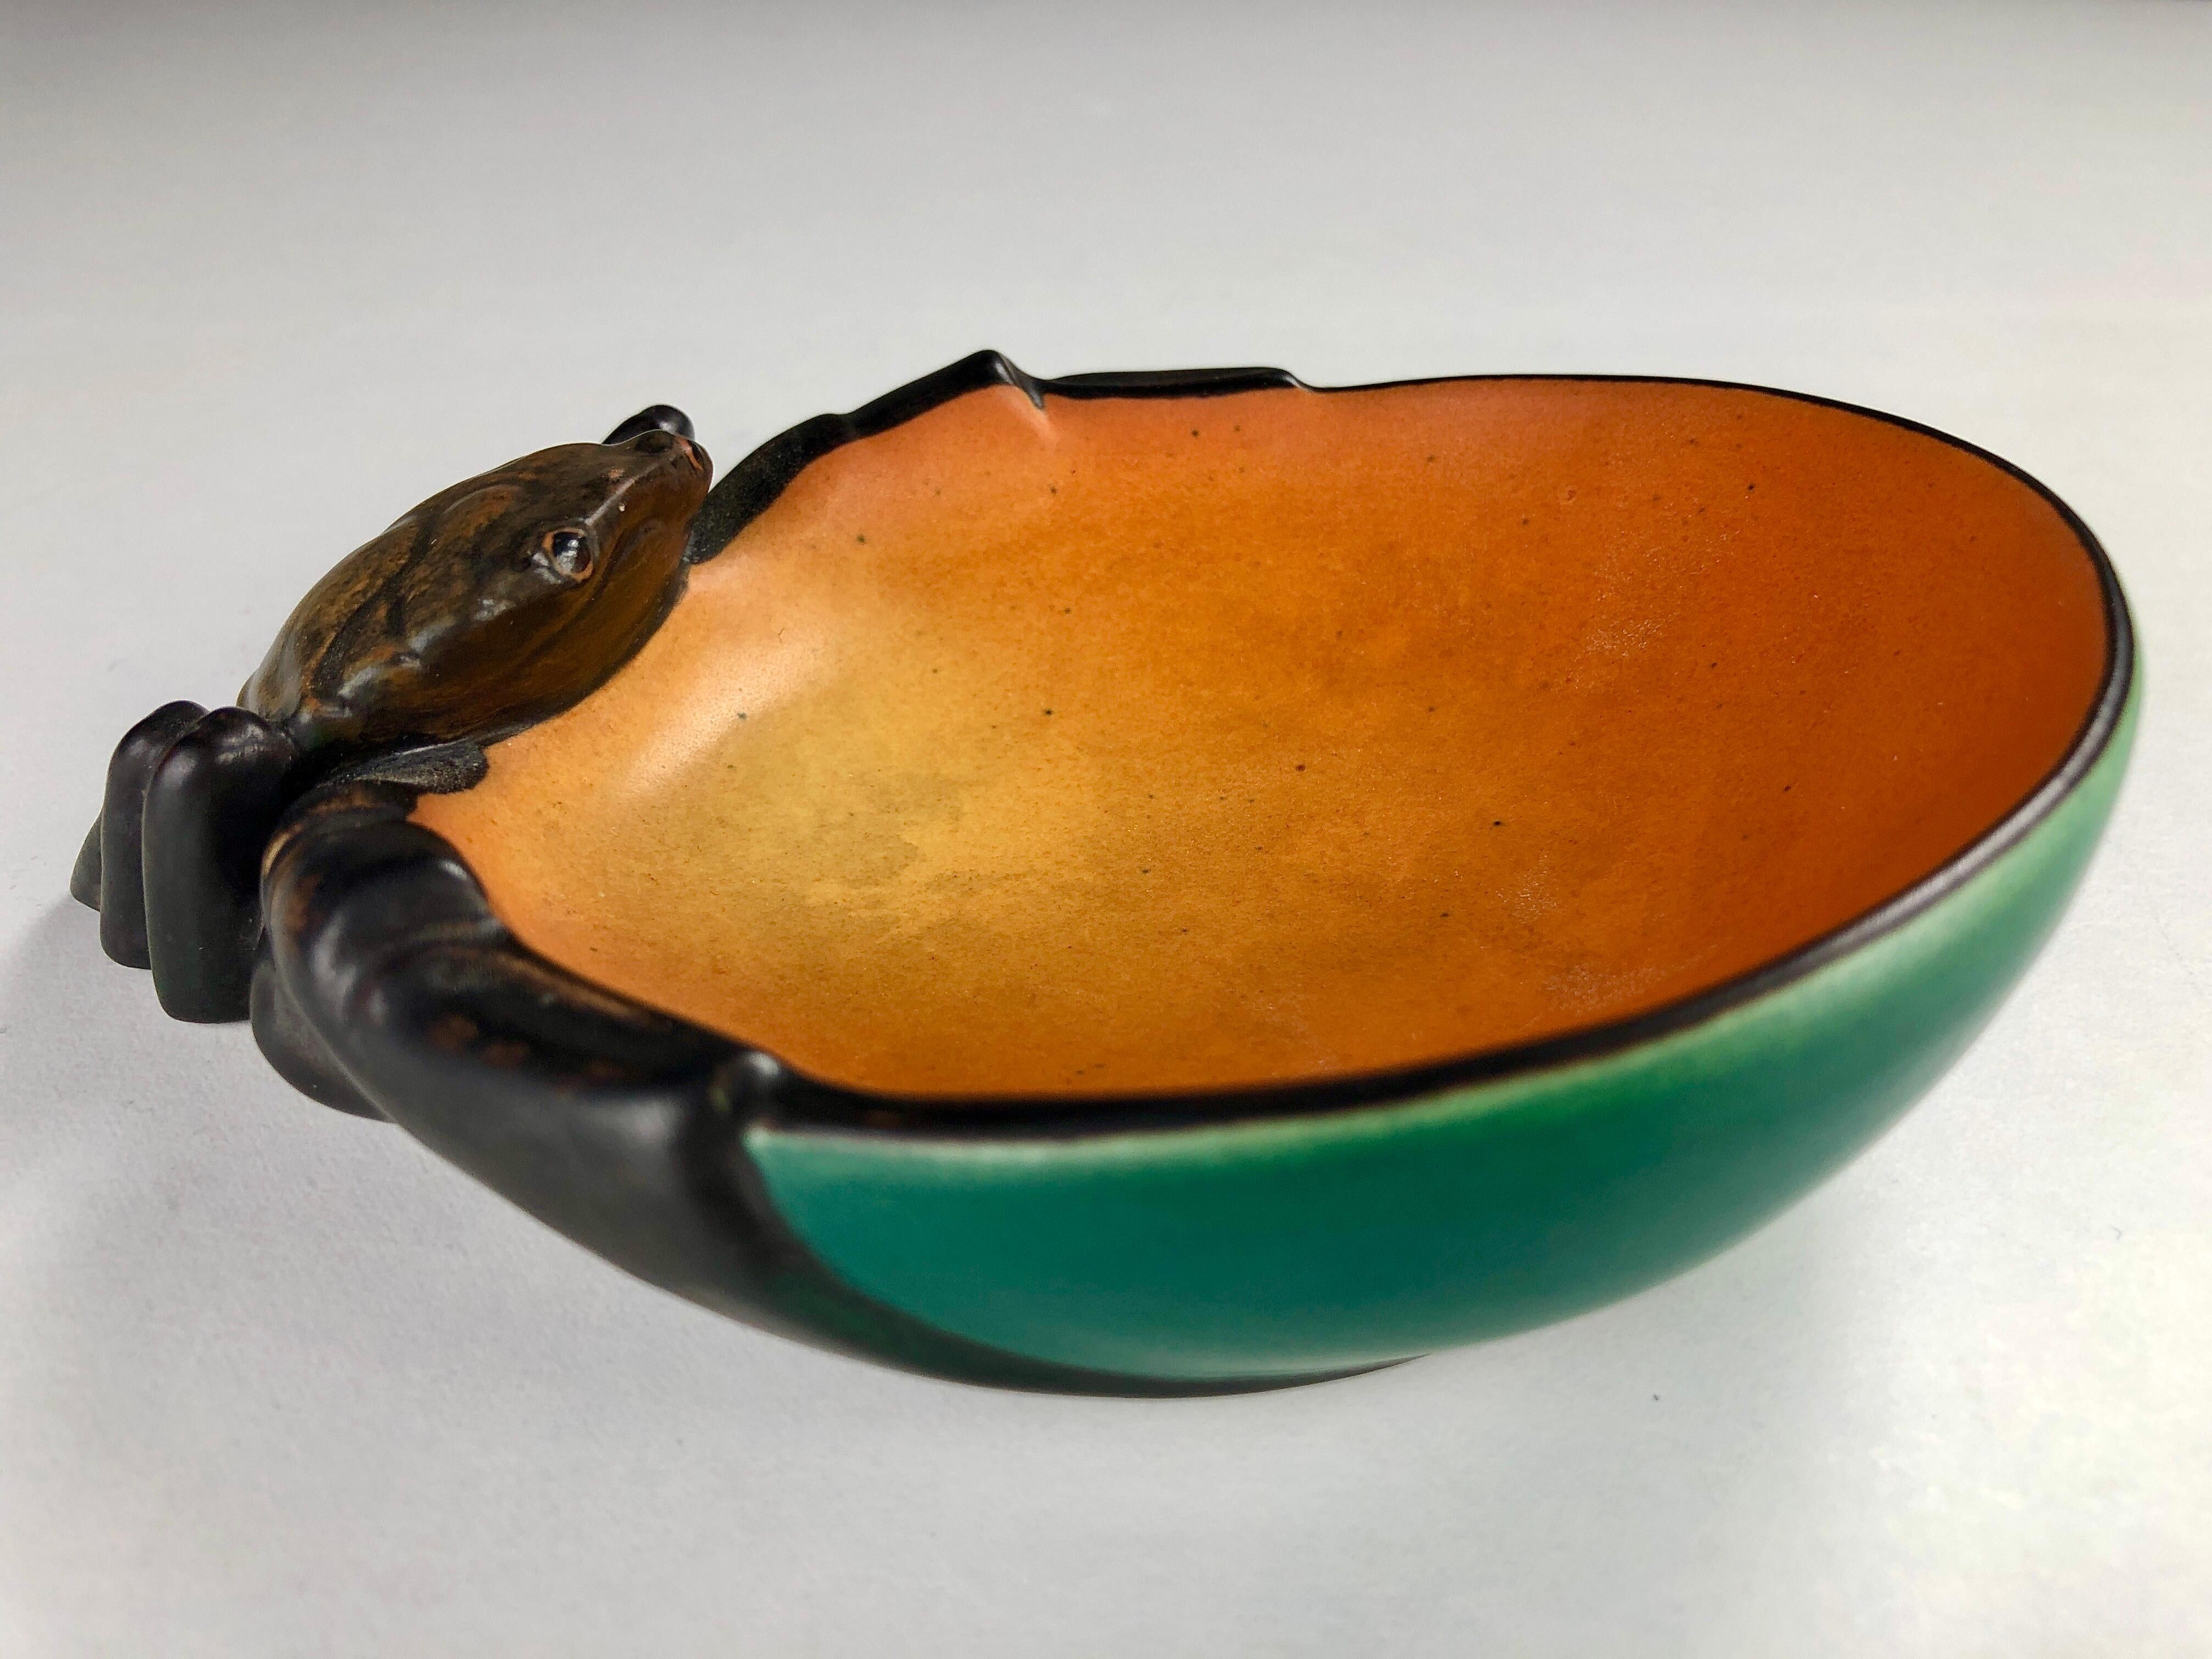 Danish Hand-Crafted Art Nouveau Ash Tray / Bowl by Georg Jensen for Ipsens Enke For Sale 4